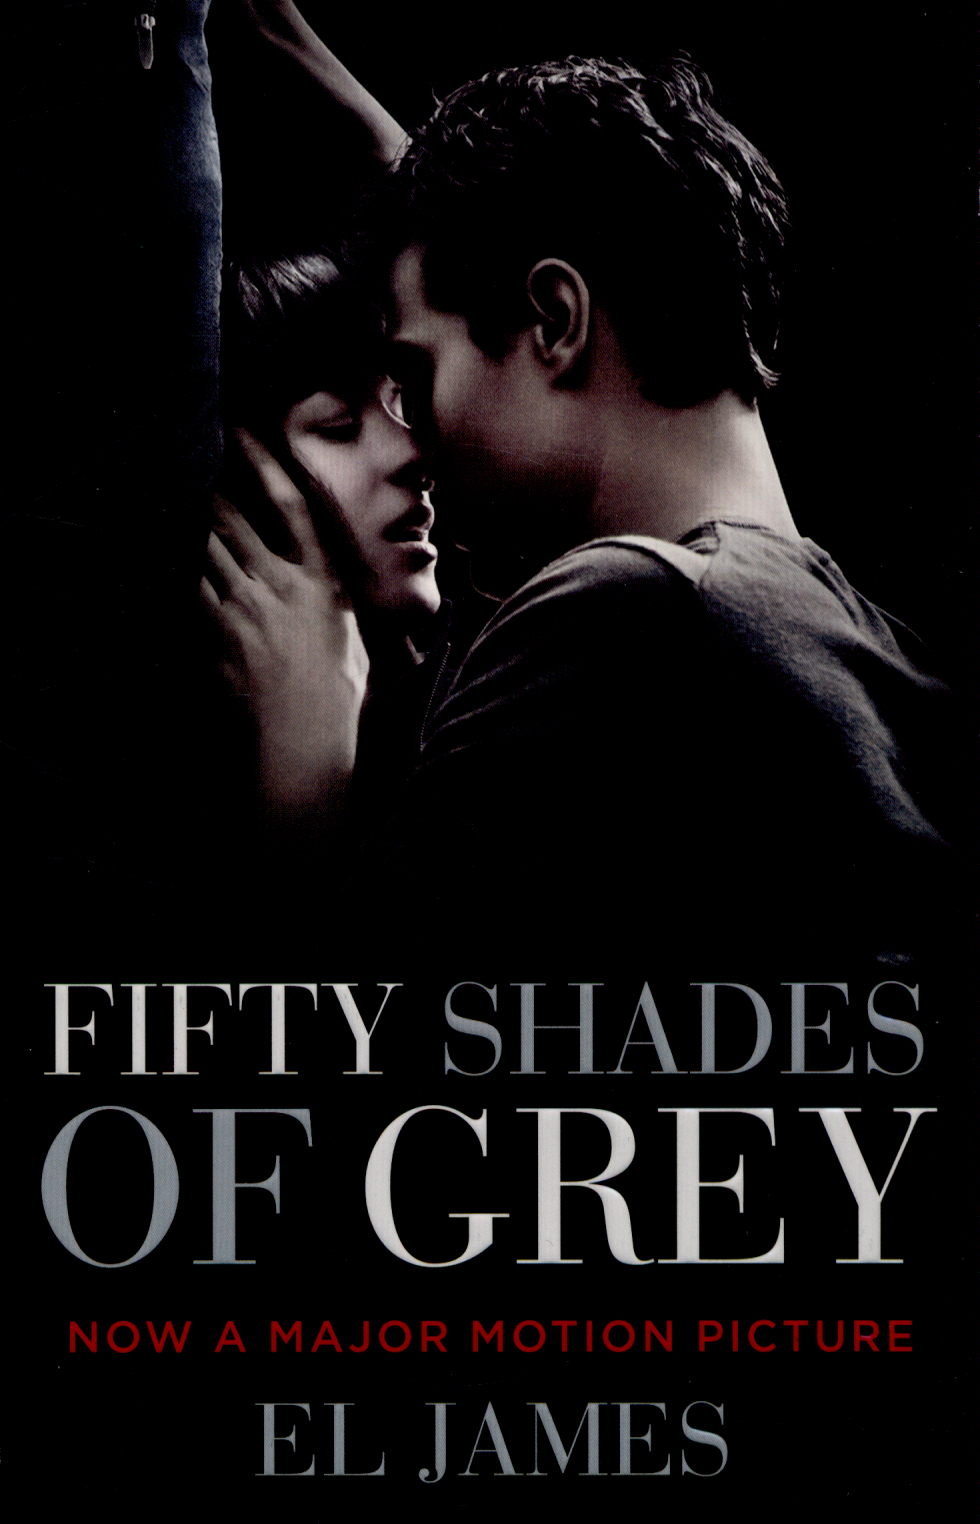 Fifty Shades of Grey (Film Tie-in Edition)